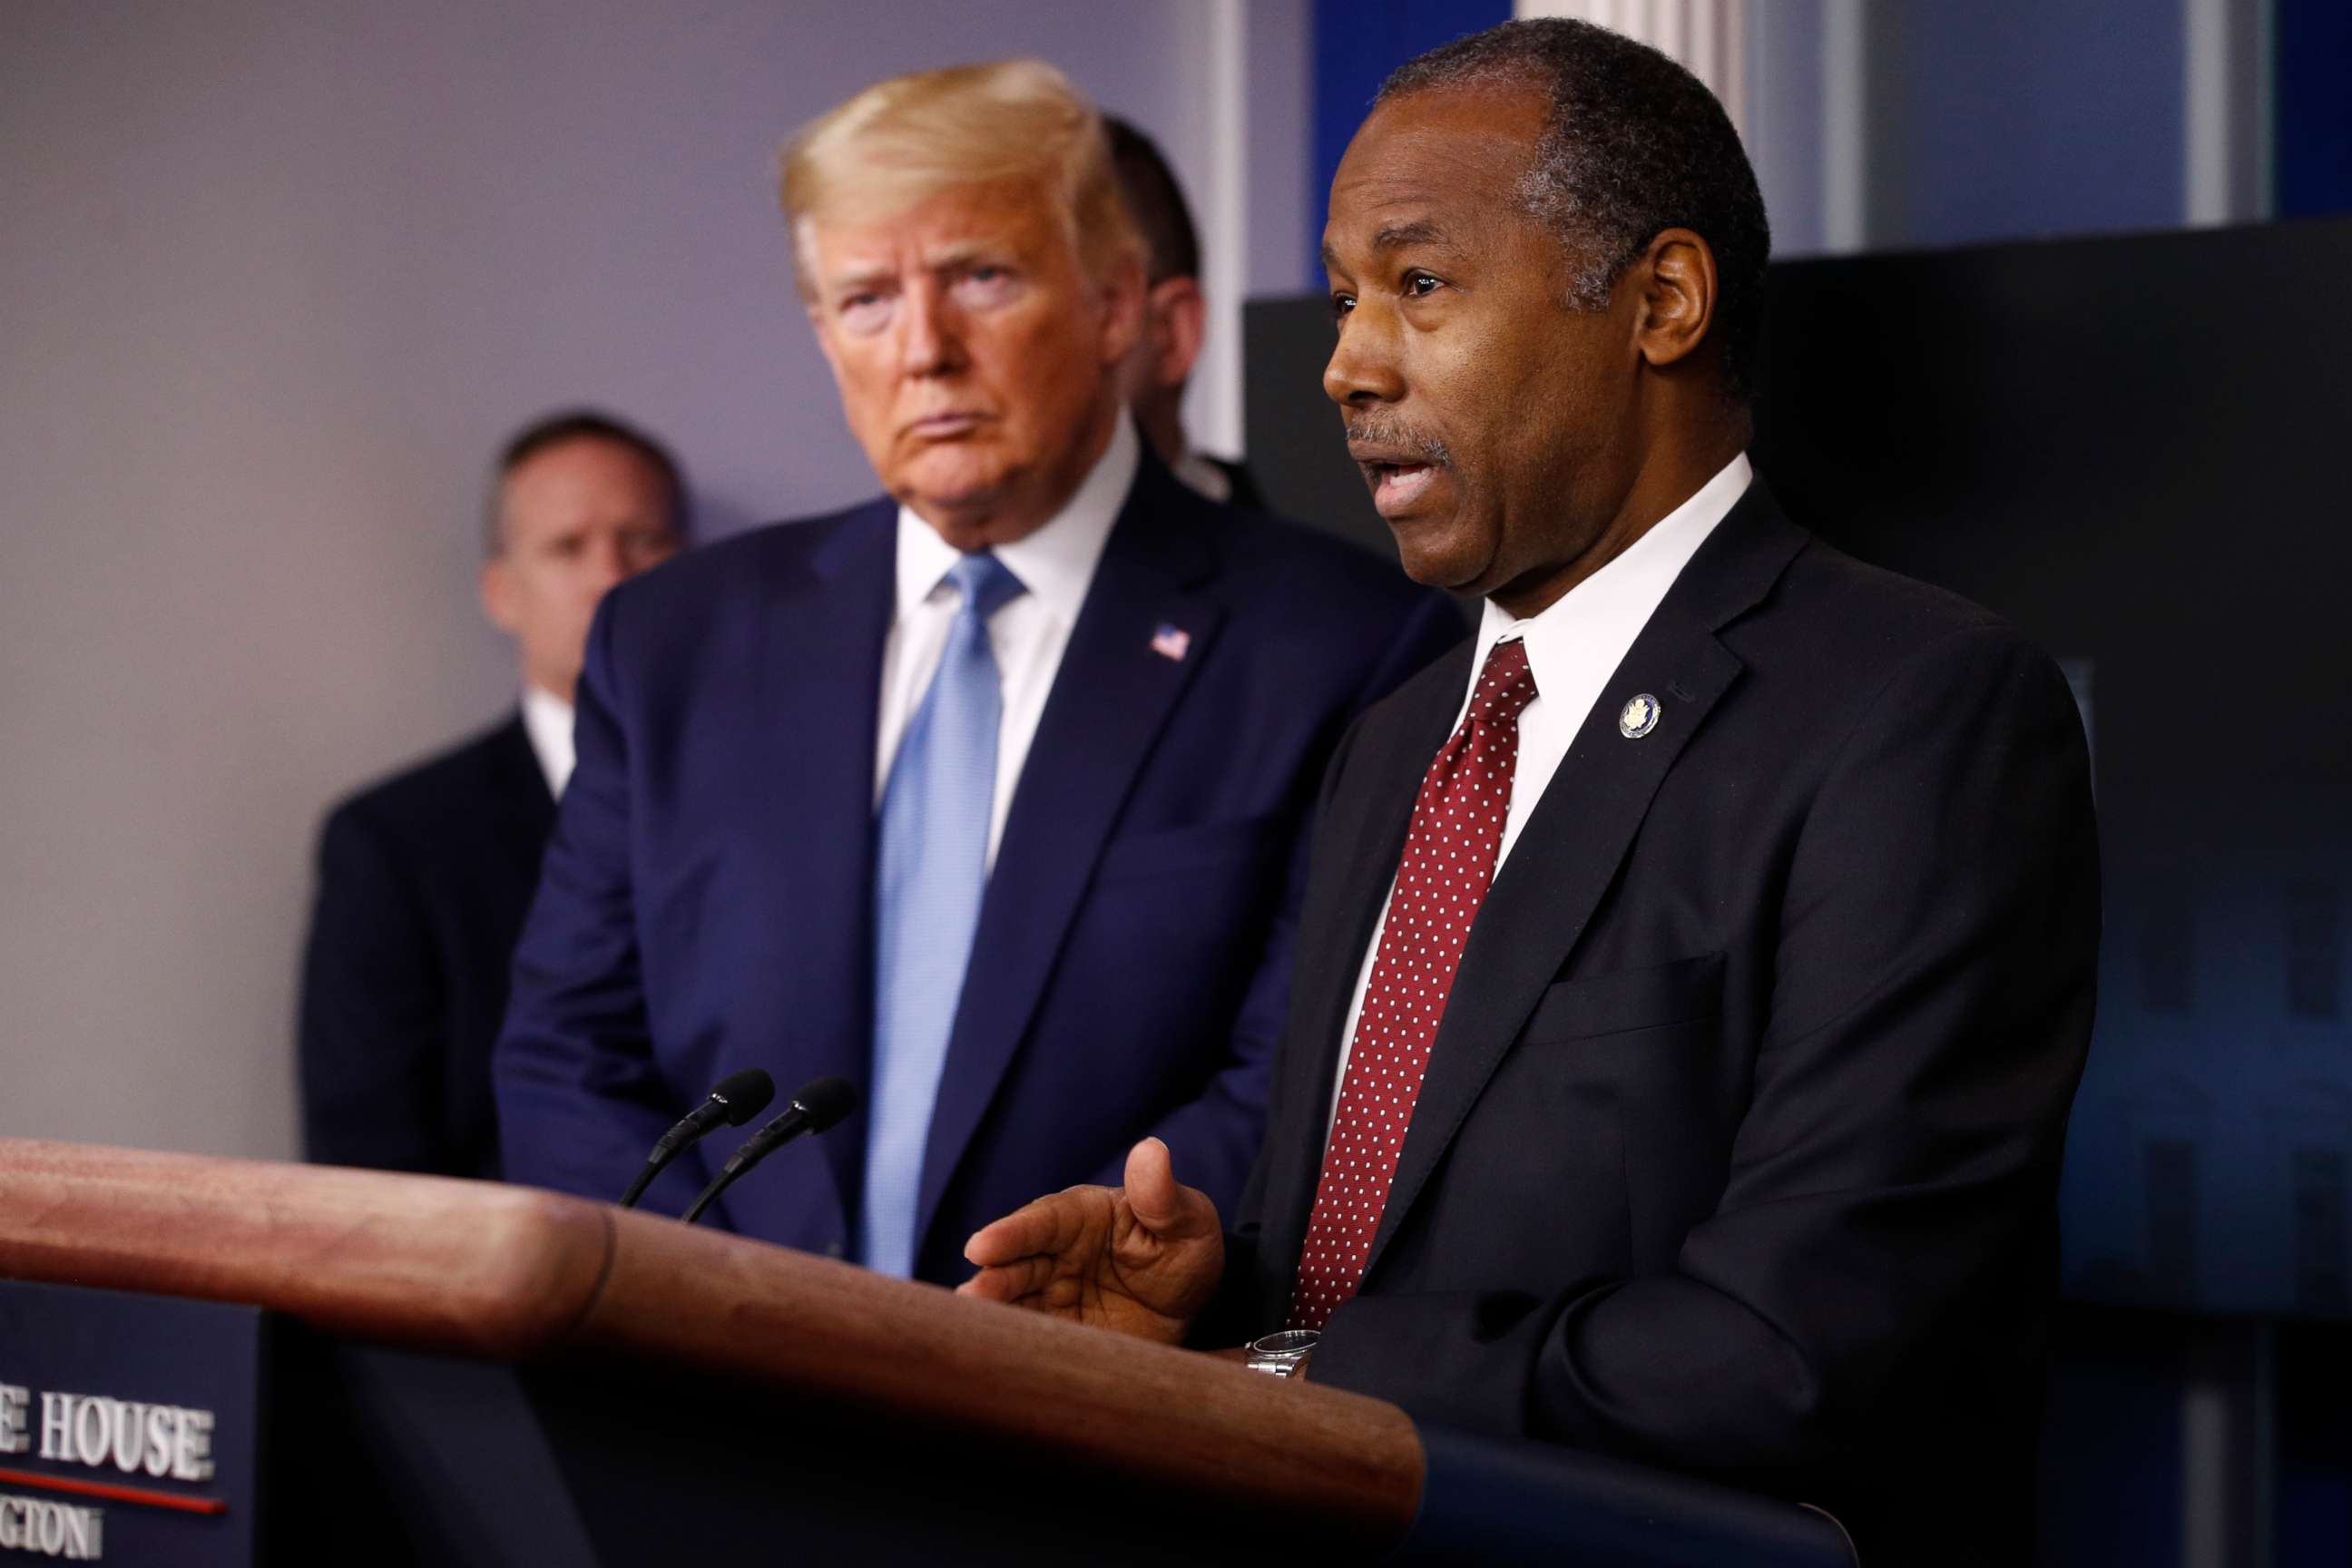 PHOTO: President Donald Trump listens as Housing and Urban Development Secretary Ben Carson speaks during a coronavirus task force briefing at the White House, Saturday, March 21, 2020, in Washington.